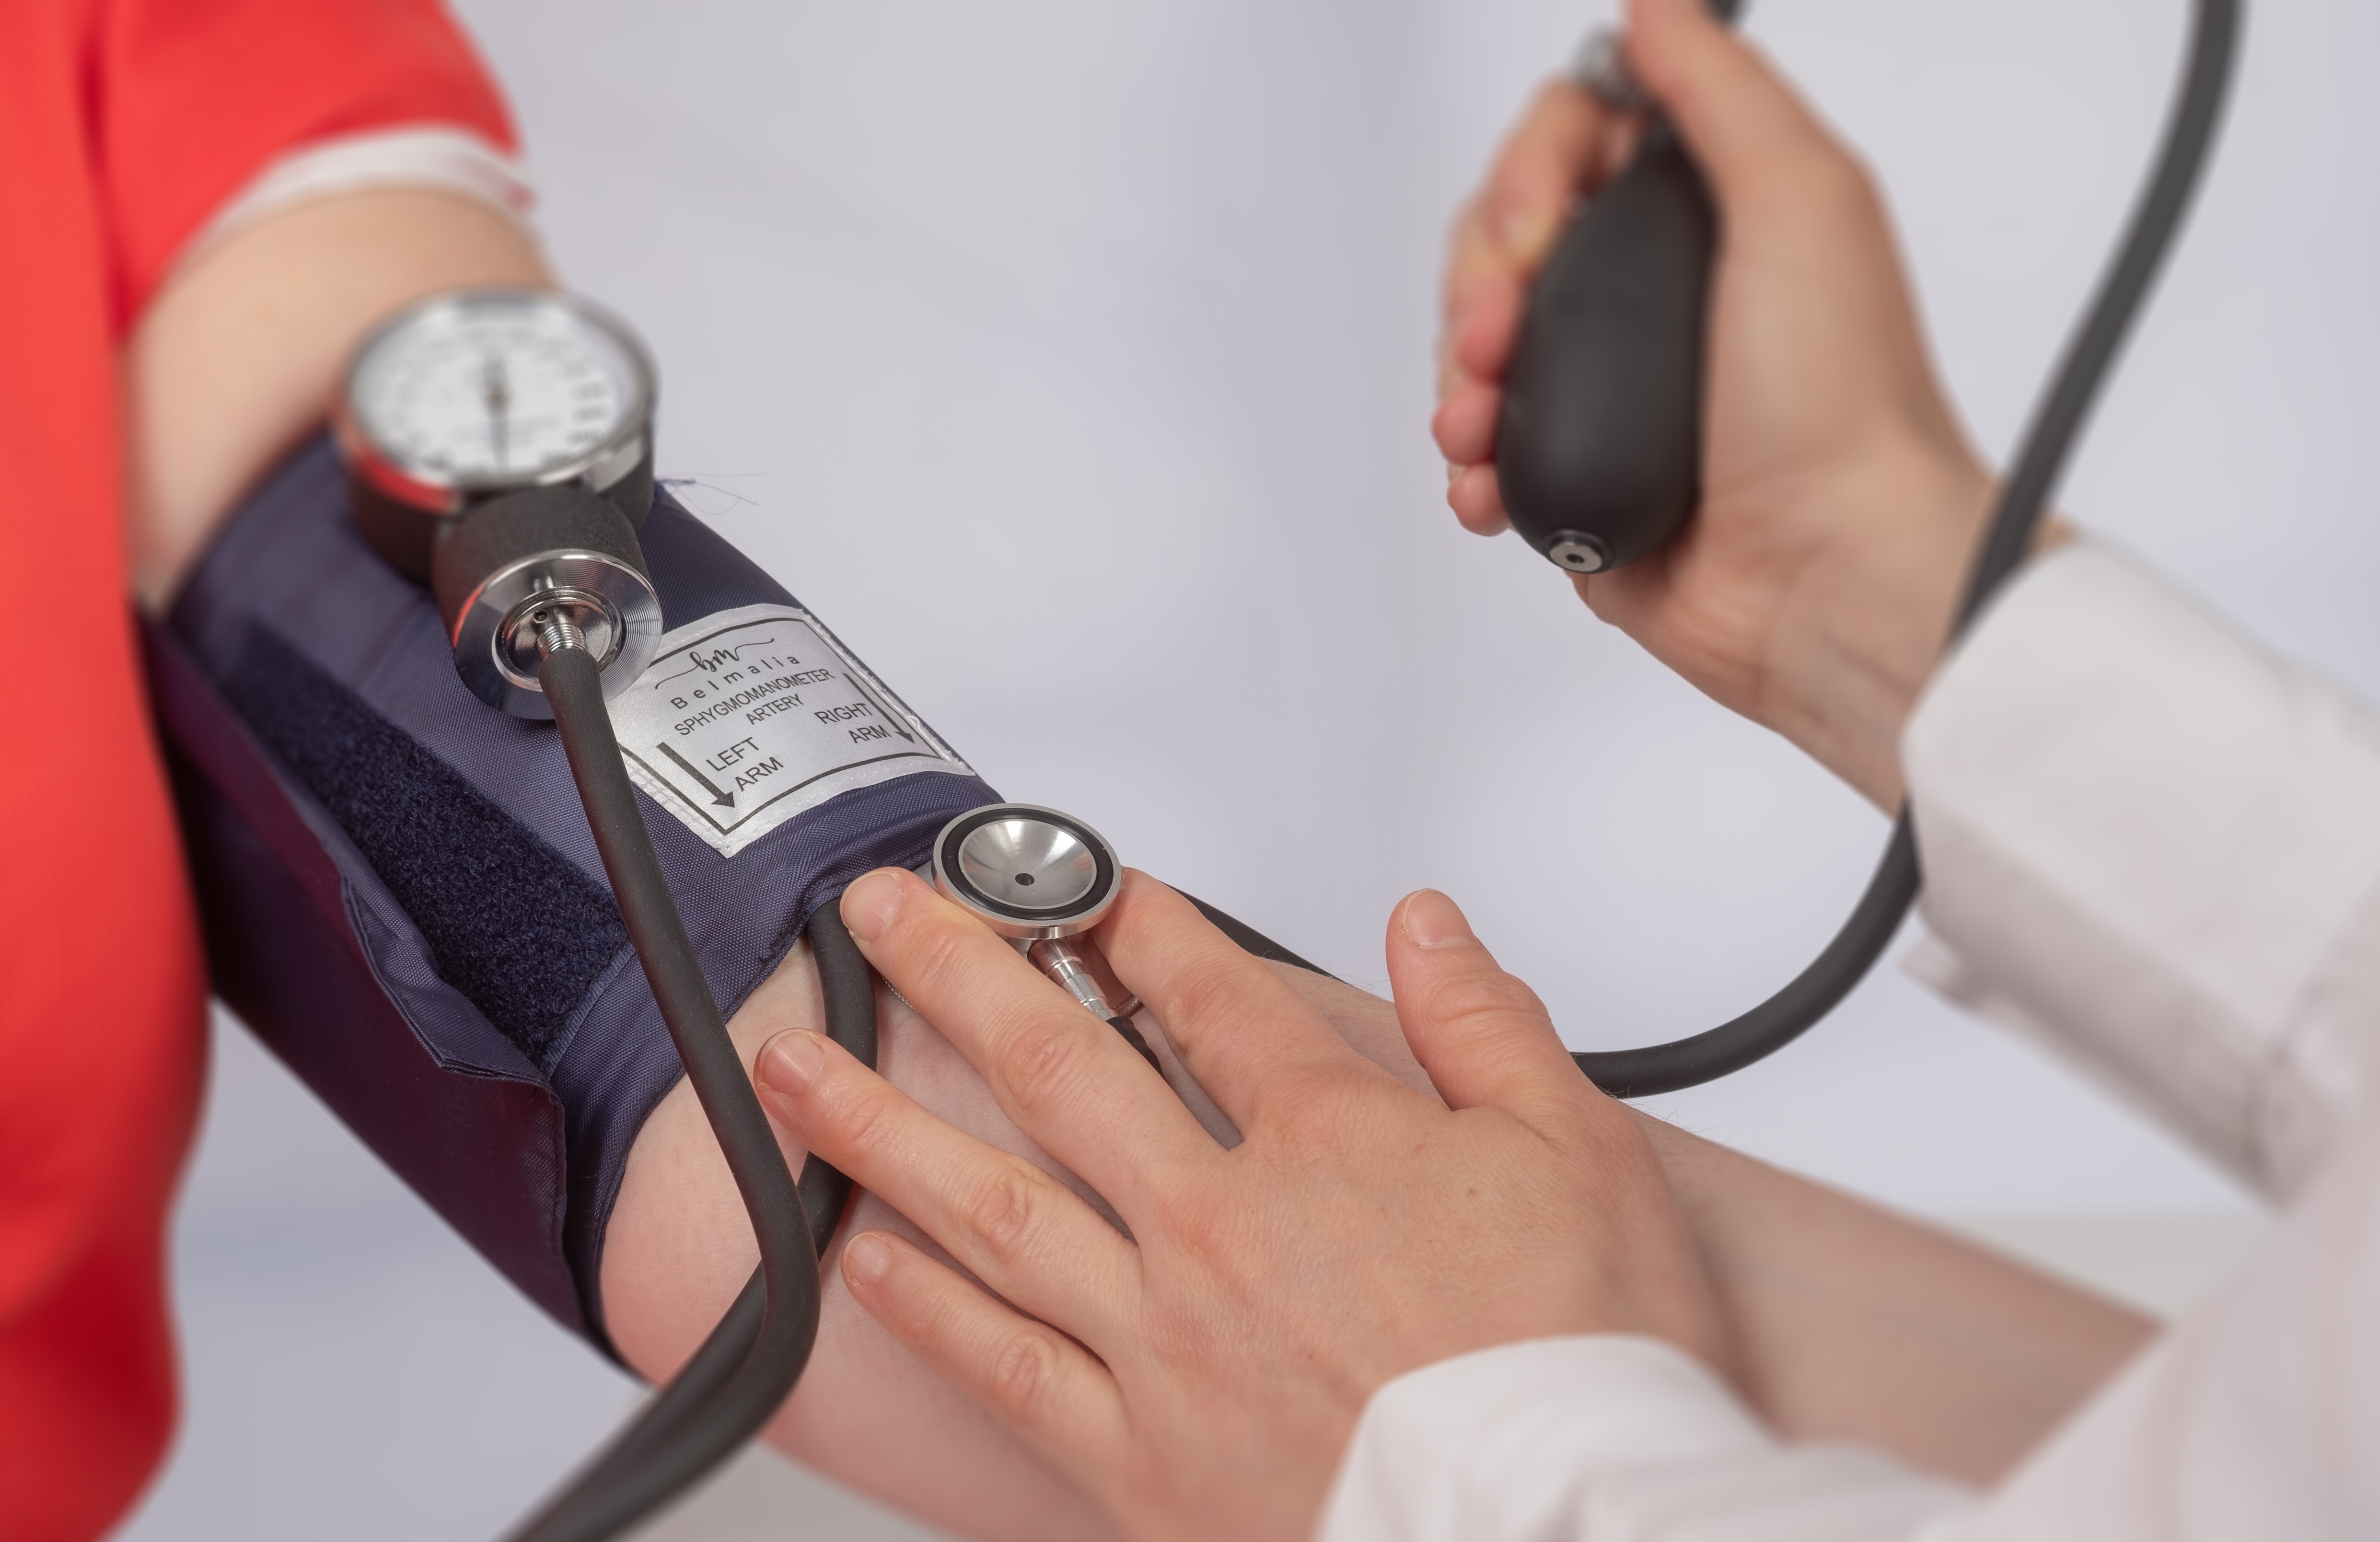 Hypertension affects nearly half of all Americans and more than one billion people worldwide.